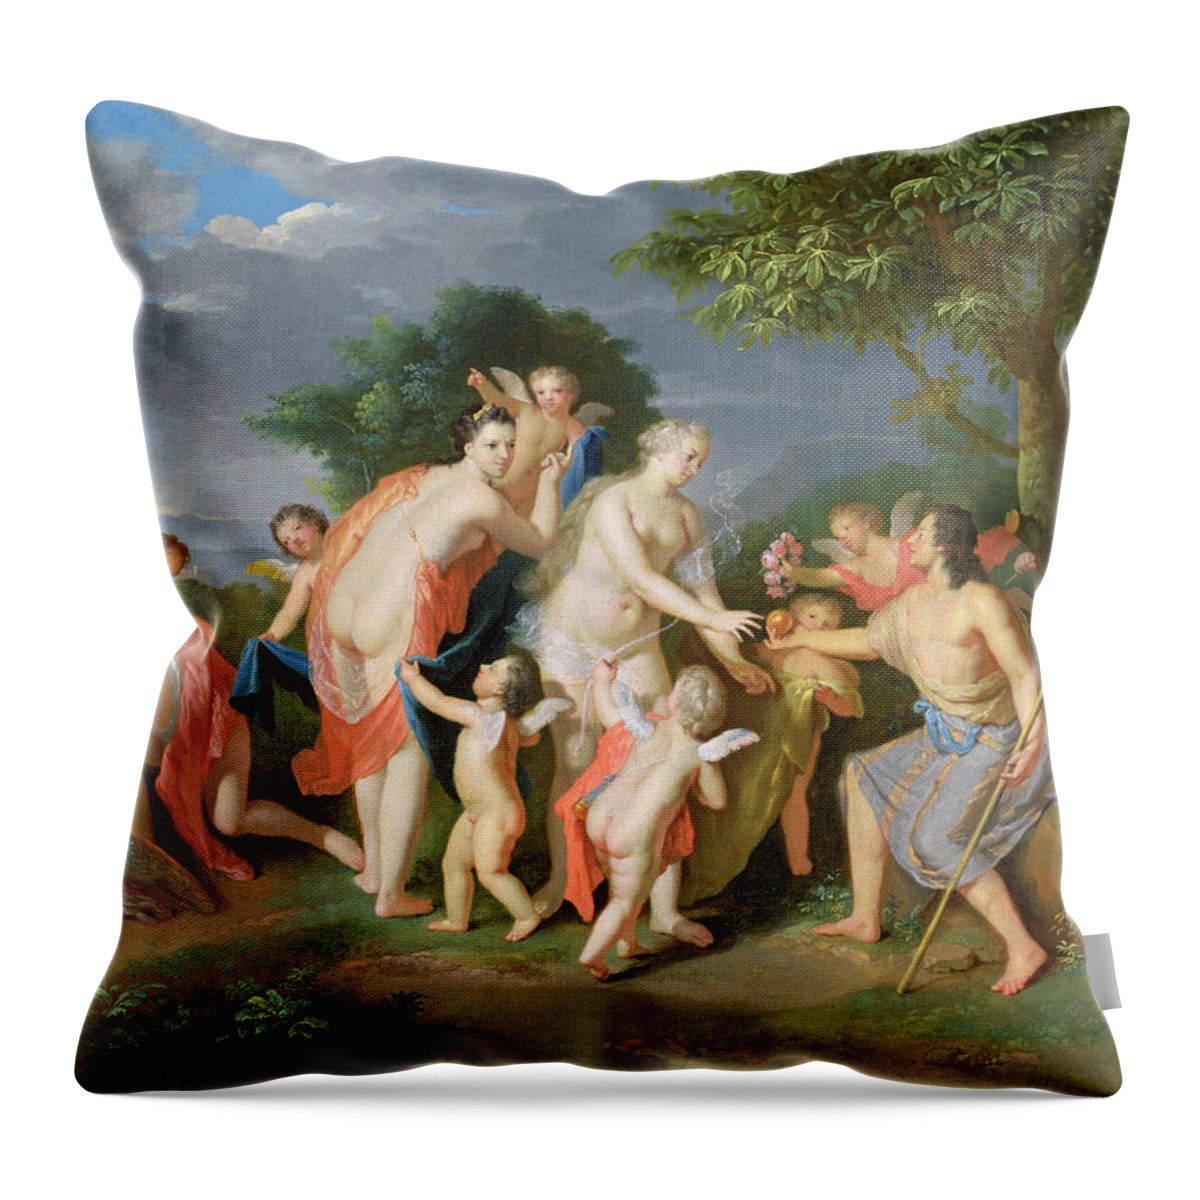 Nude Throw Pillow featuring the photograph The Judgement Of Paris by Gerard Hoet